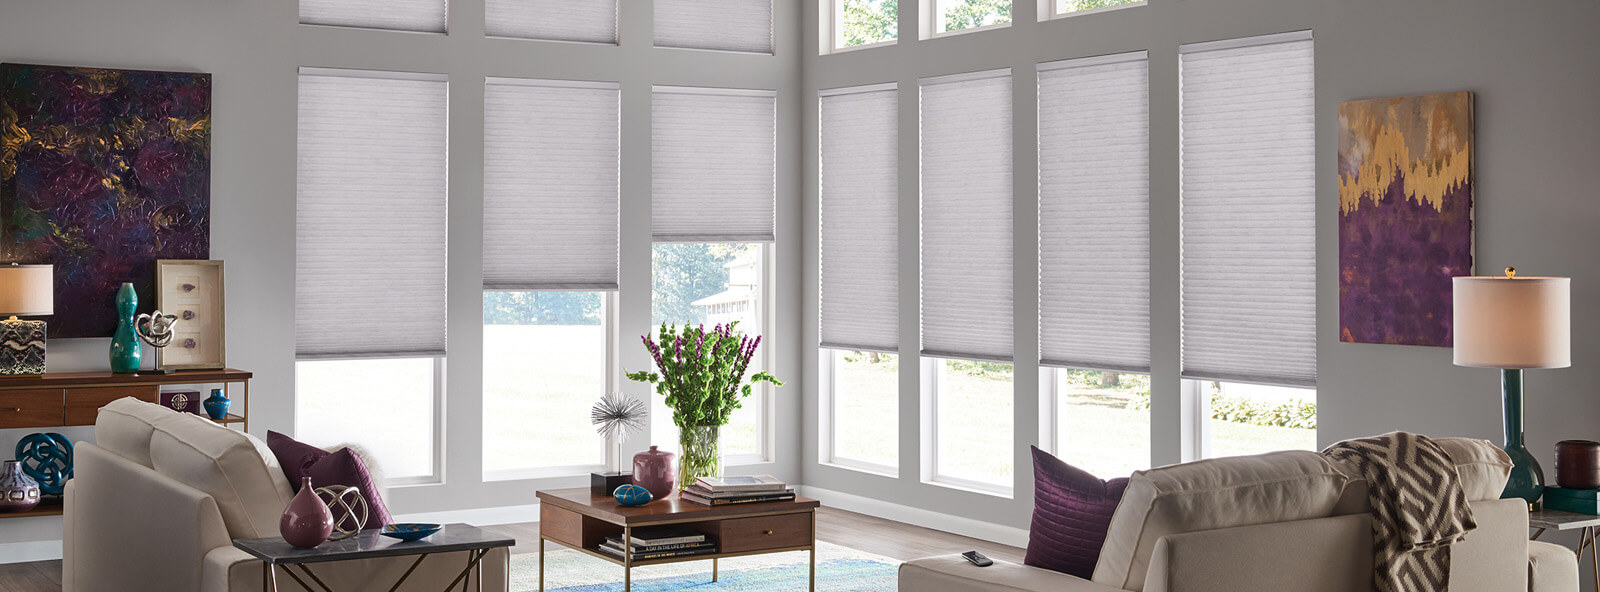 Window shades blinds